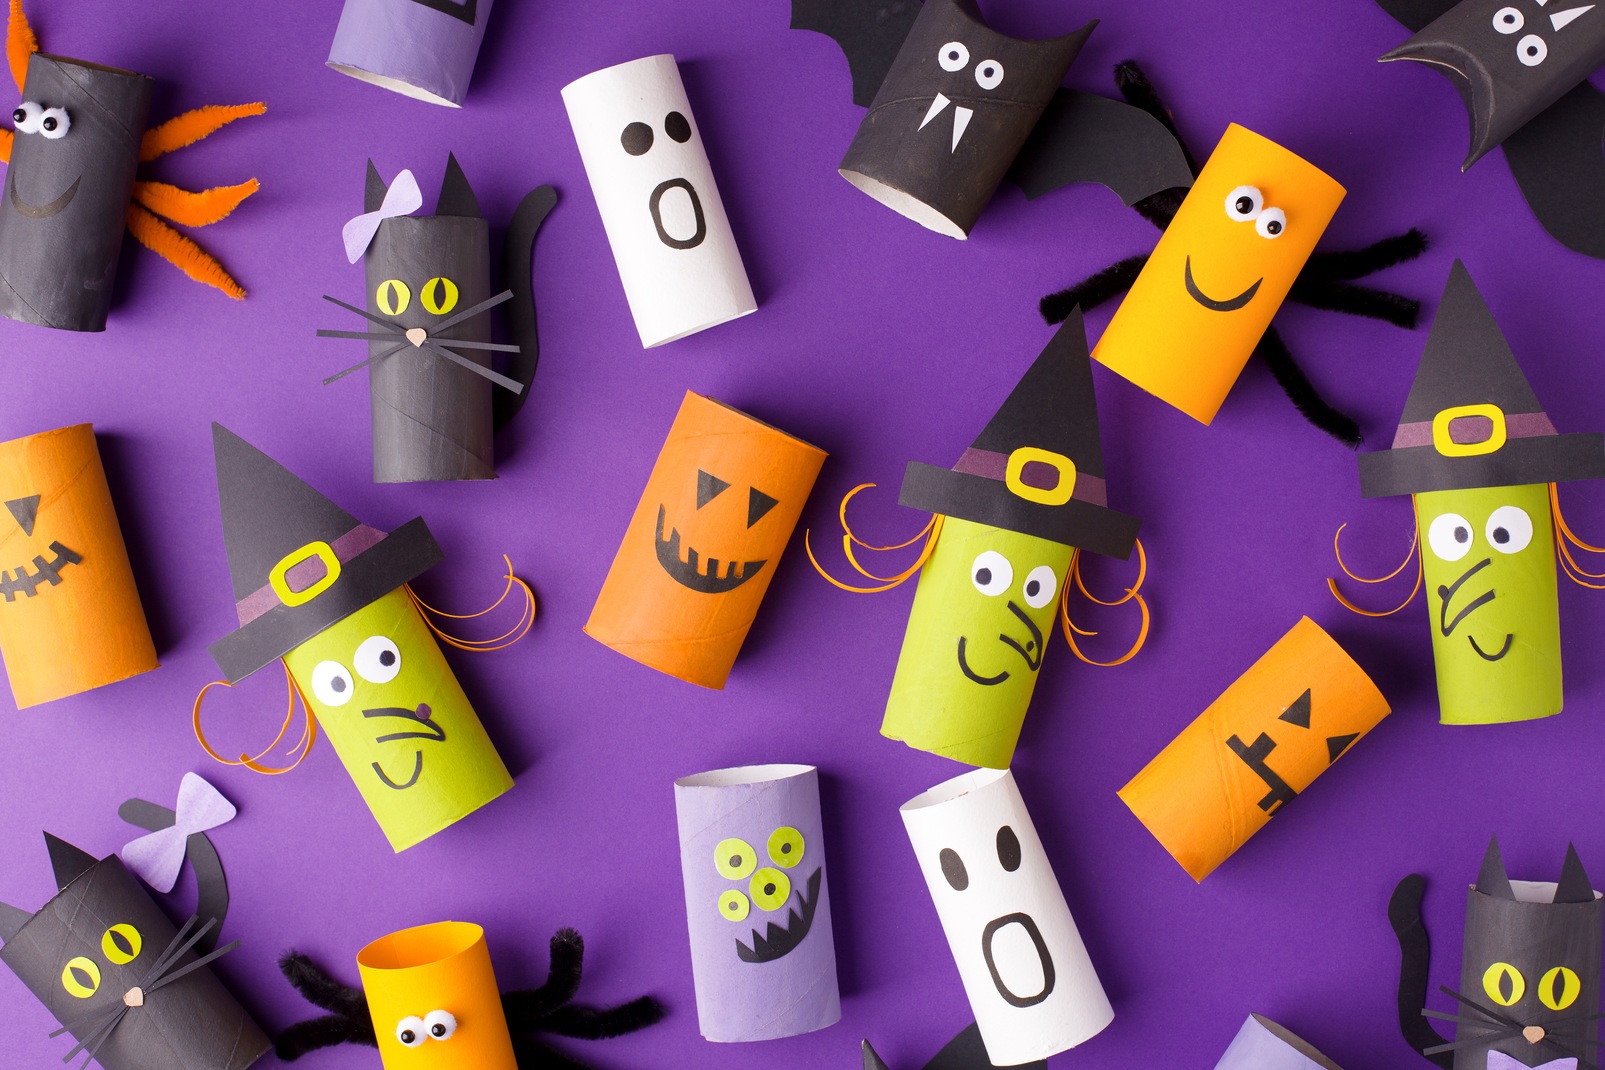 Take & Make Craft Kits for Kids: Toilet Paper Roll Witches & Cats - Limited Supply / Contact the Library to schedule a pick up